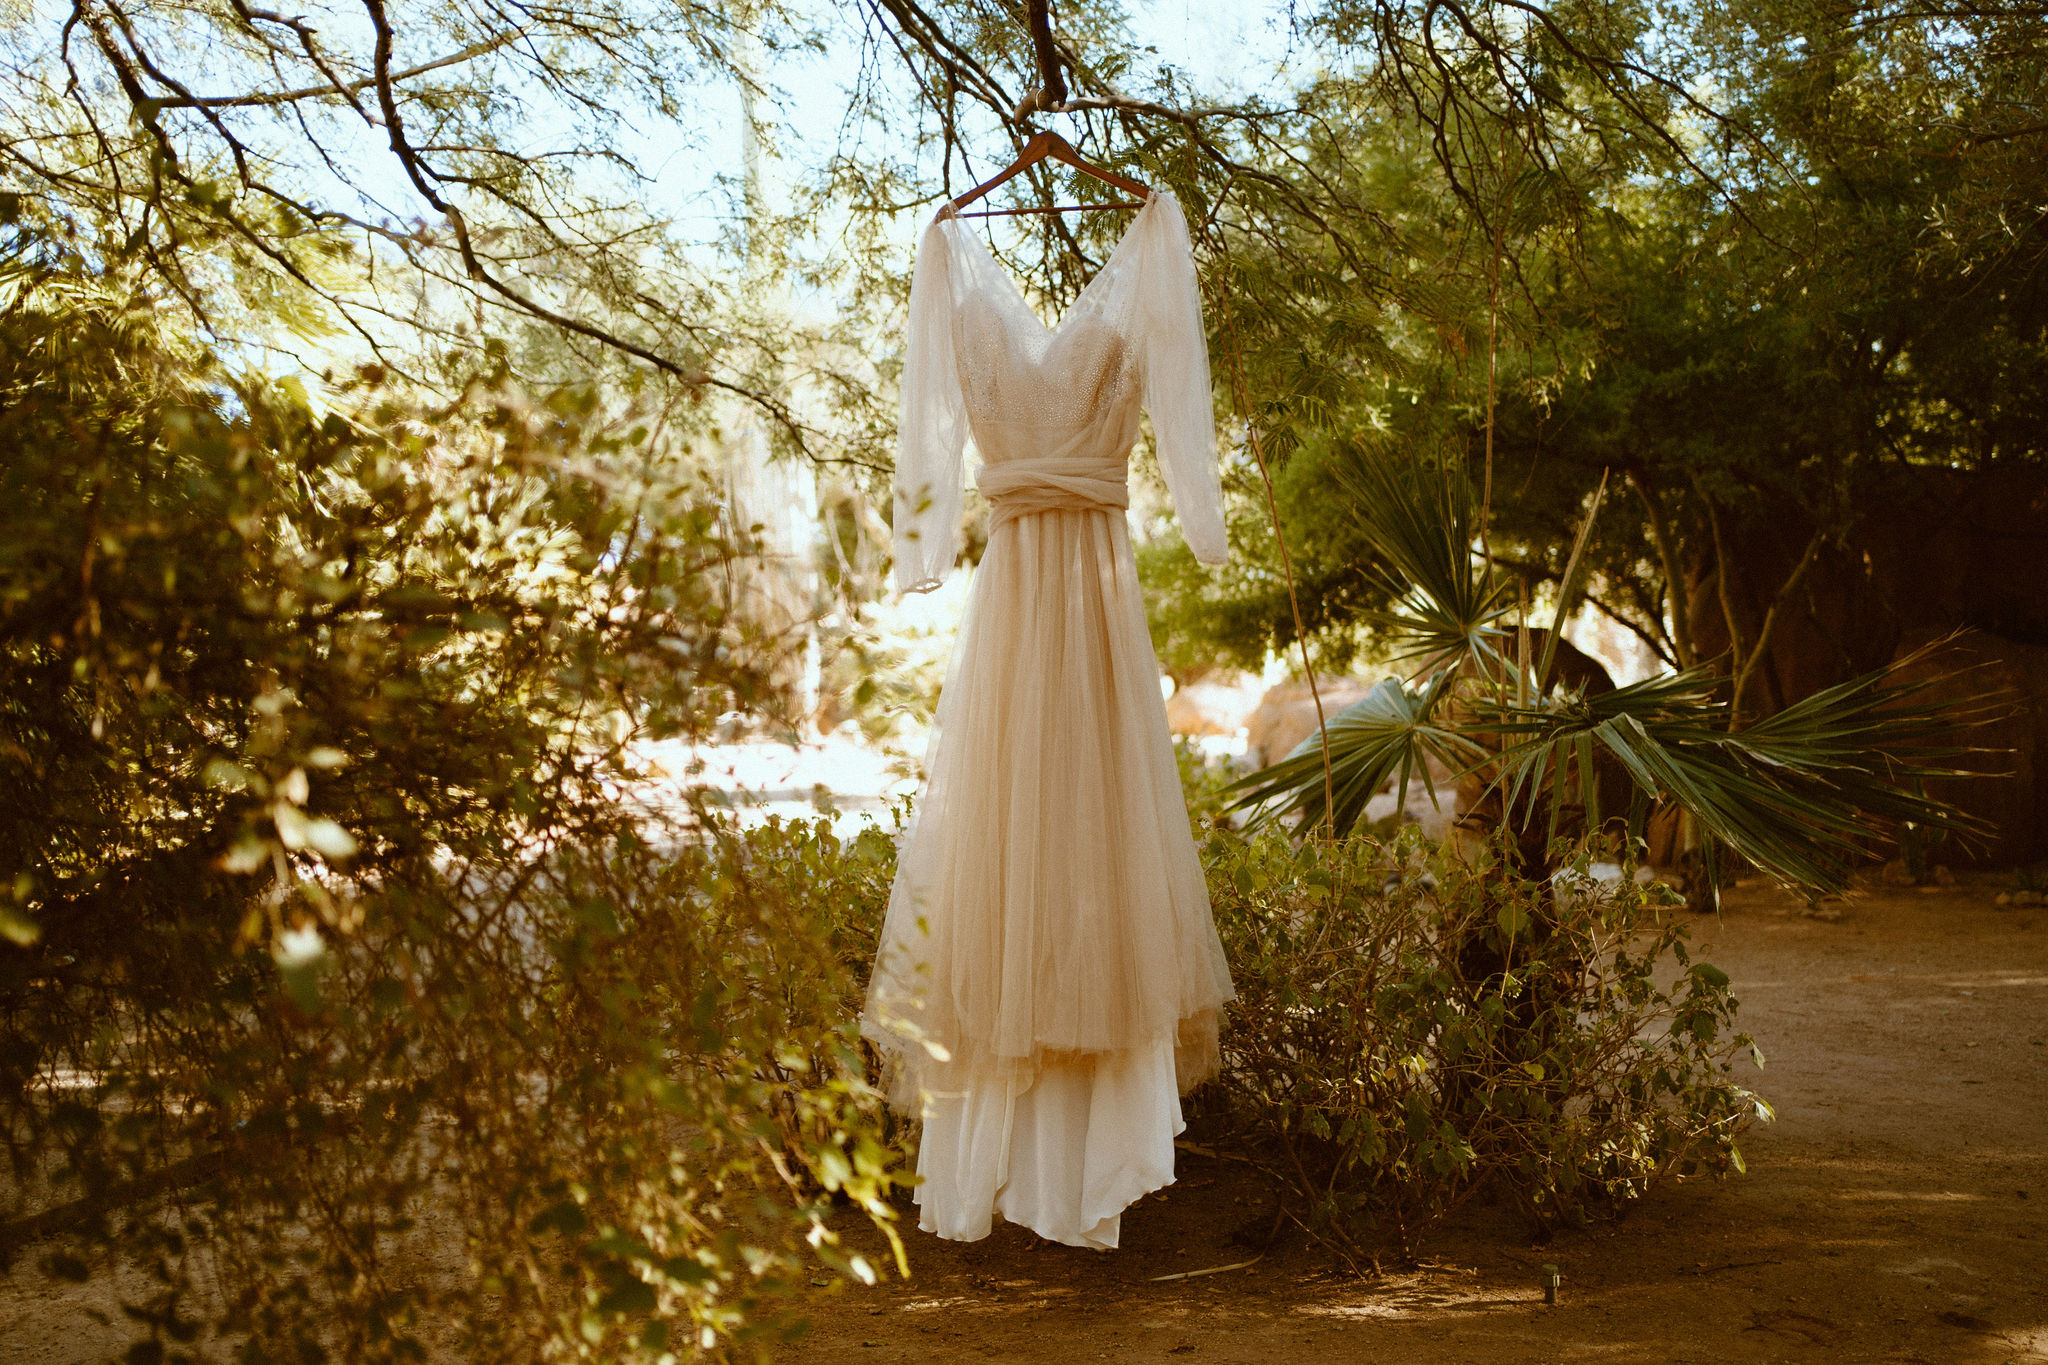 The brides beautiful wedding dress hanging in the garden 